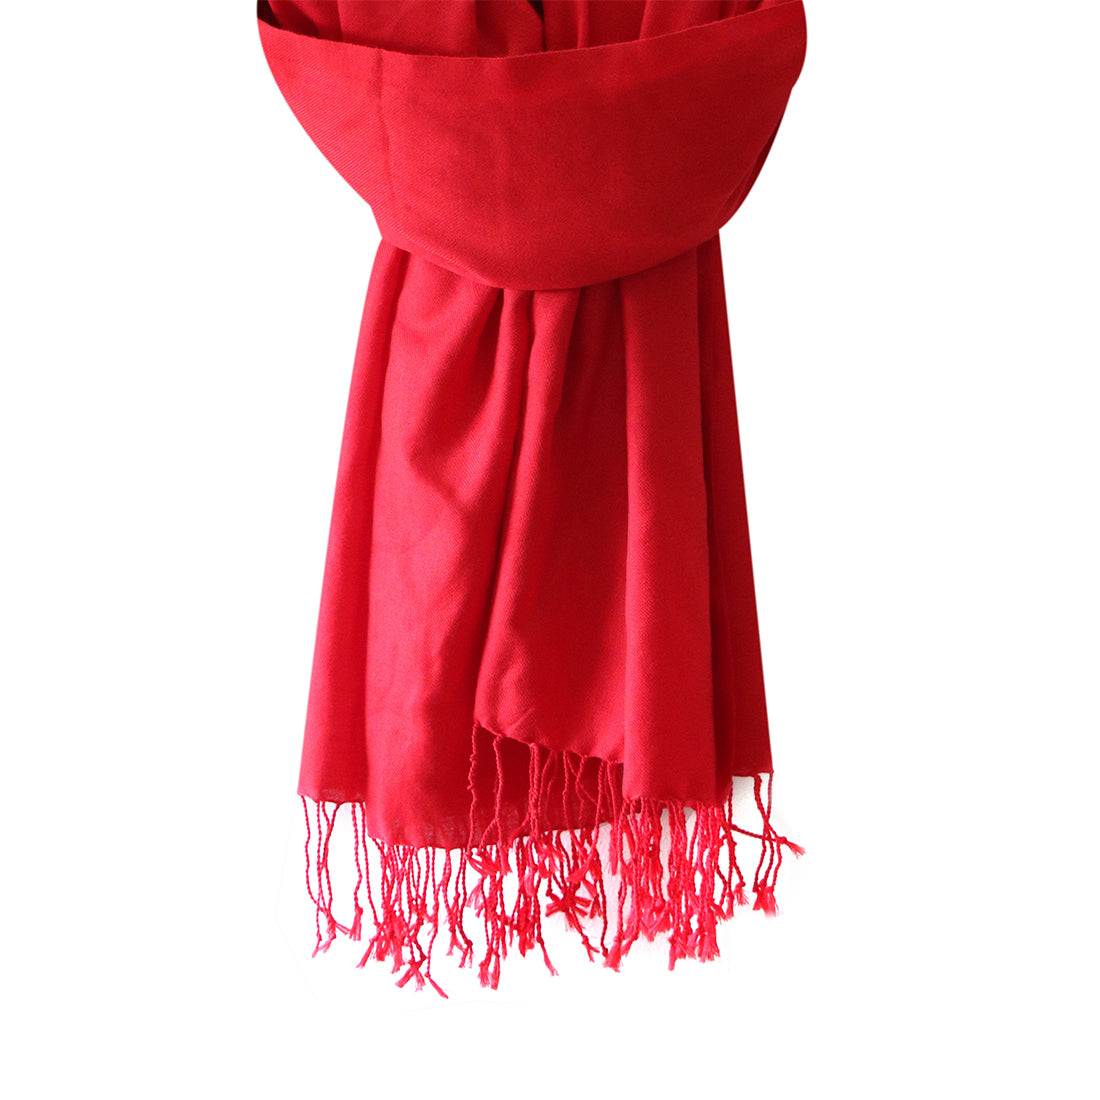 CONTEMPORARY SOLID BRIGHT RED ACRYLIC SCARF